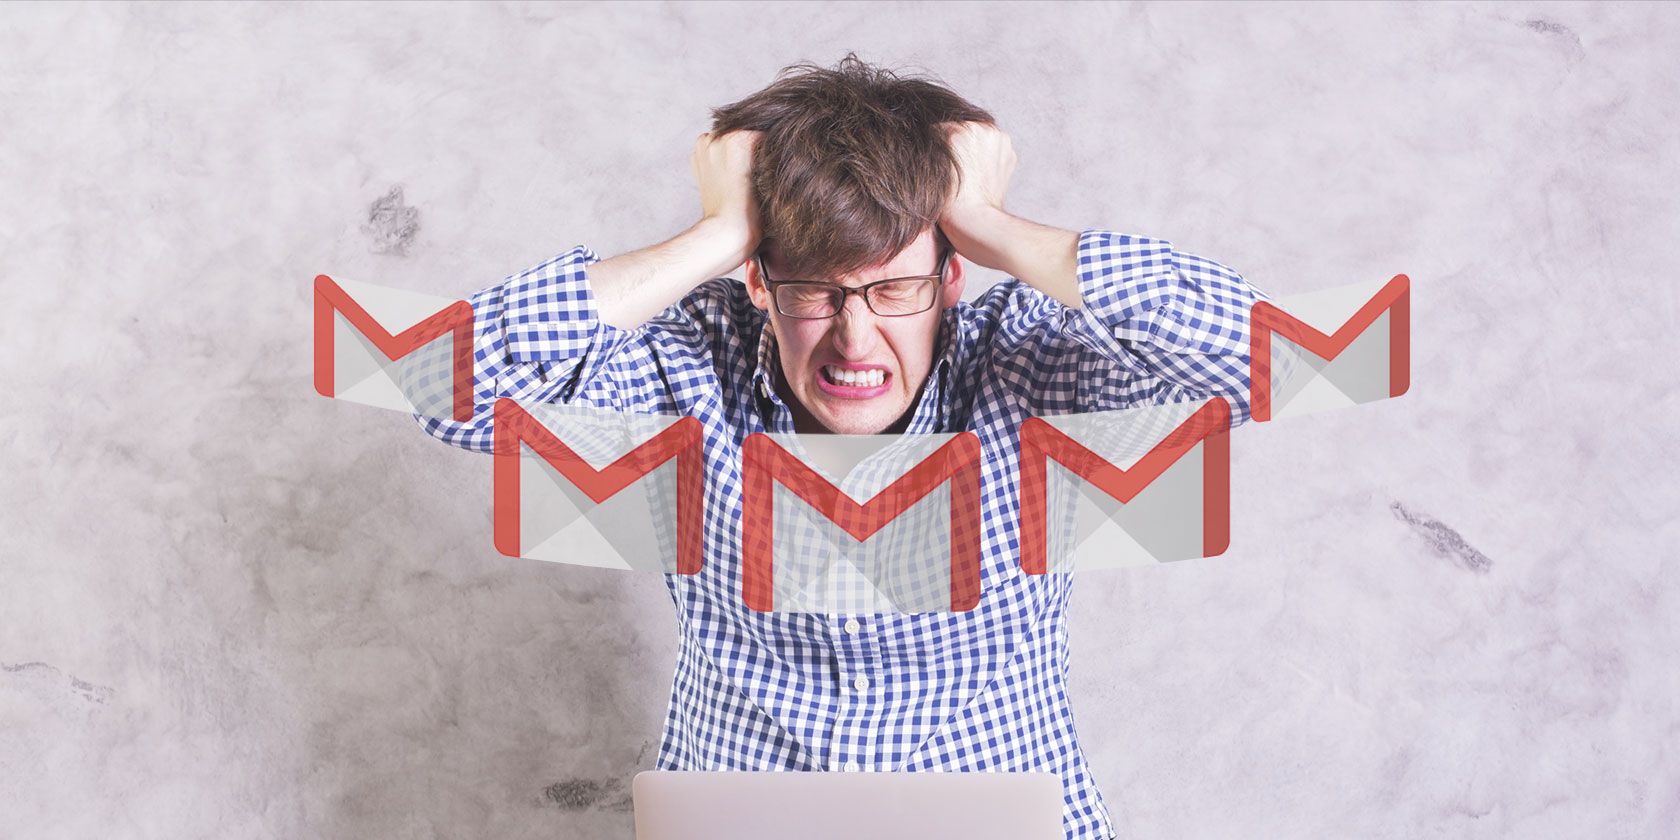 five Gmail app logos on a background of an annoyed person